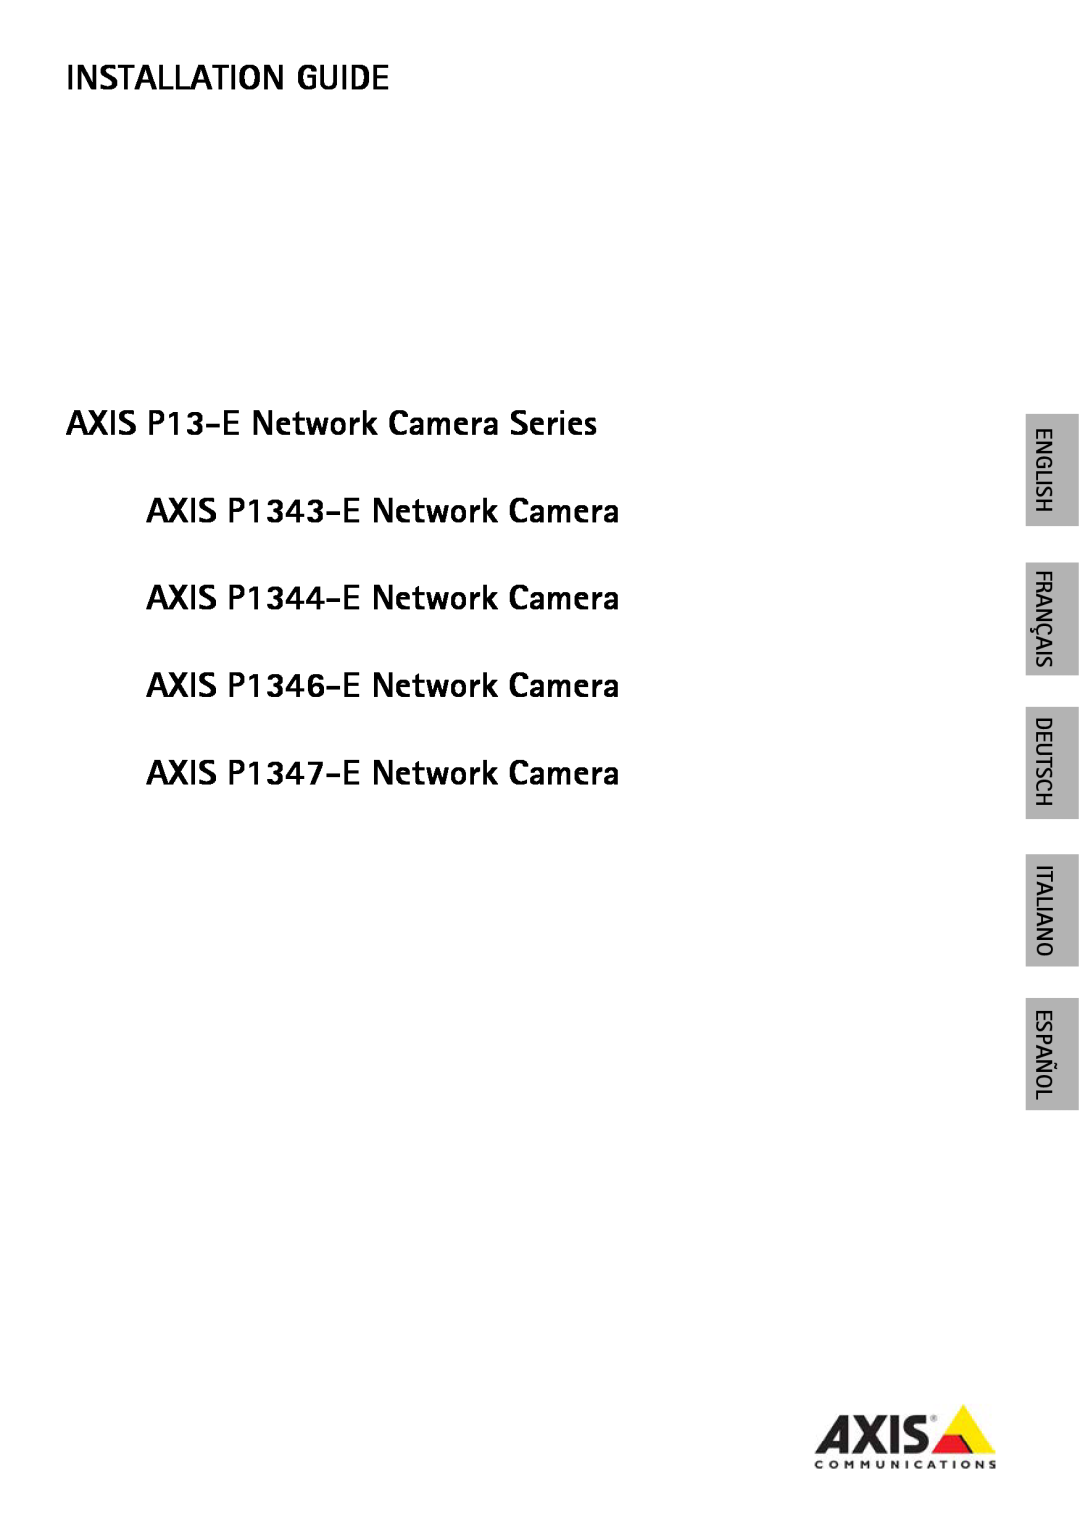 Axis Communications user manual AXIS P1343-ENetwork Camera 